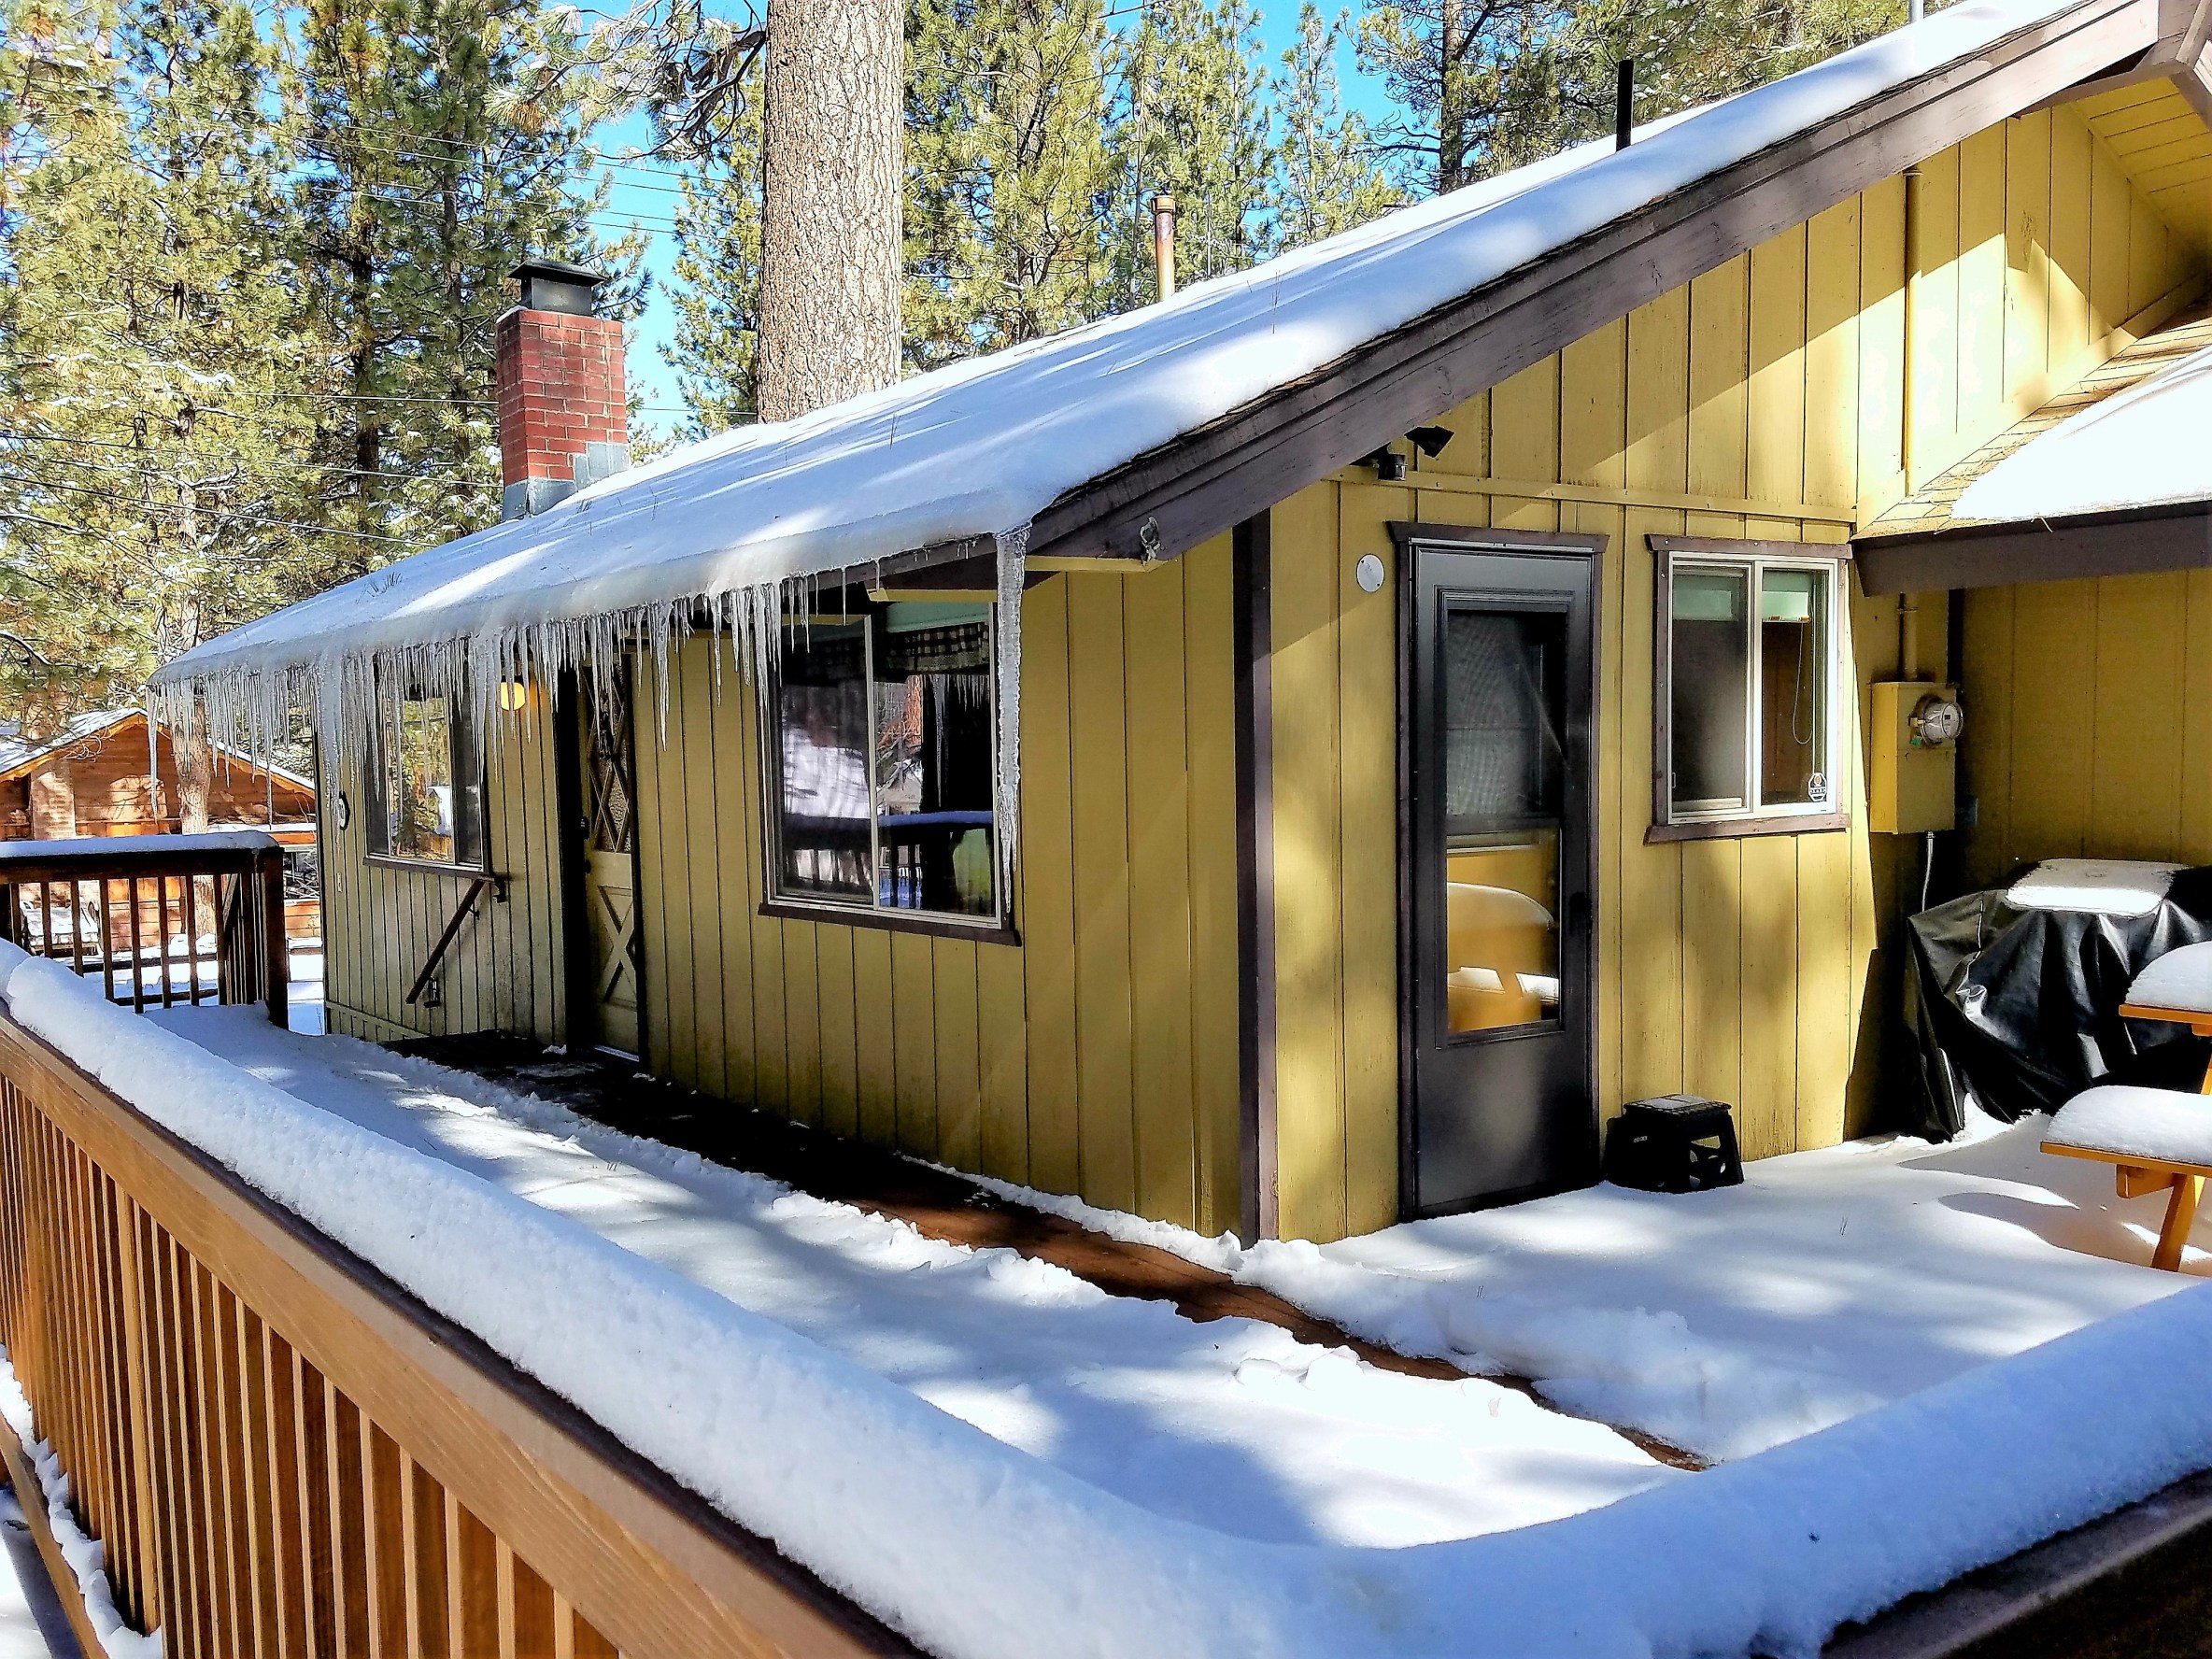 A small yellow cabin with a snow covered roof and porch surrounded by trees